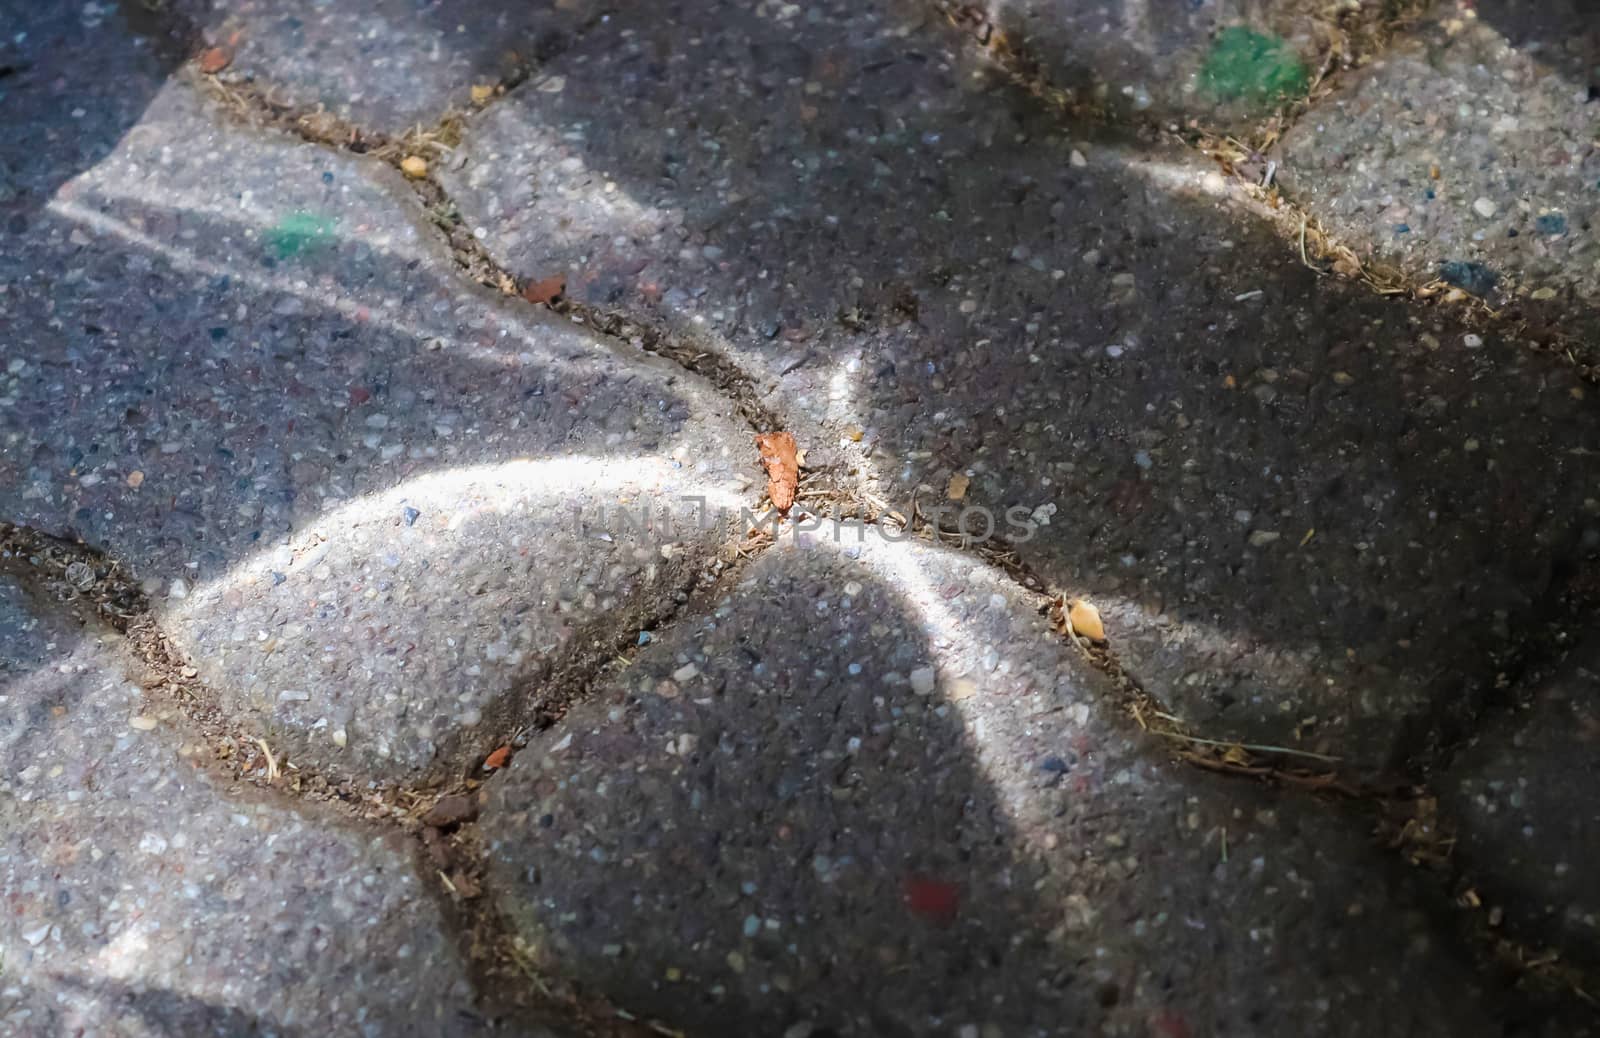 Caustic light effects from refraction in glass on an ashalt ground